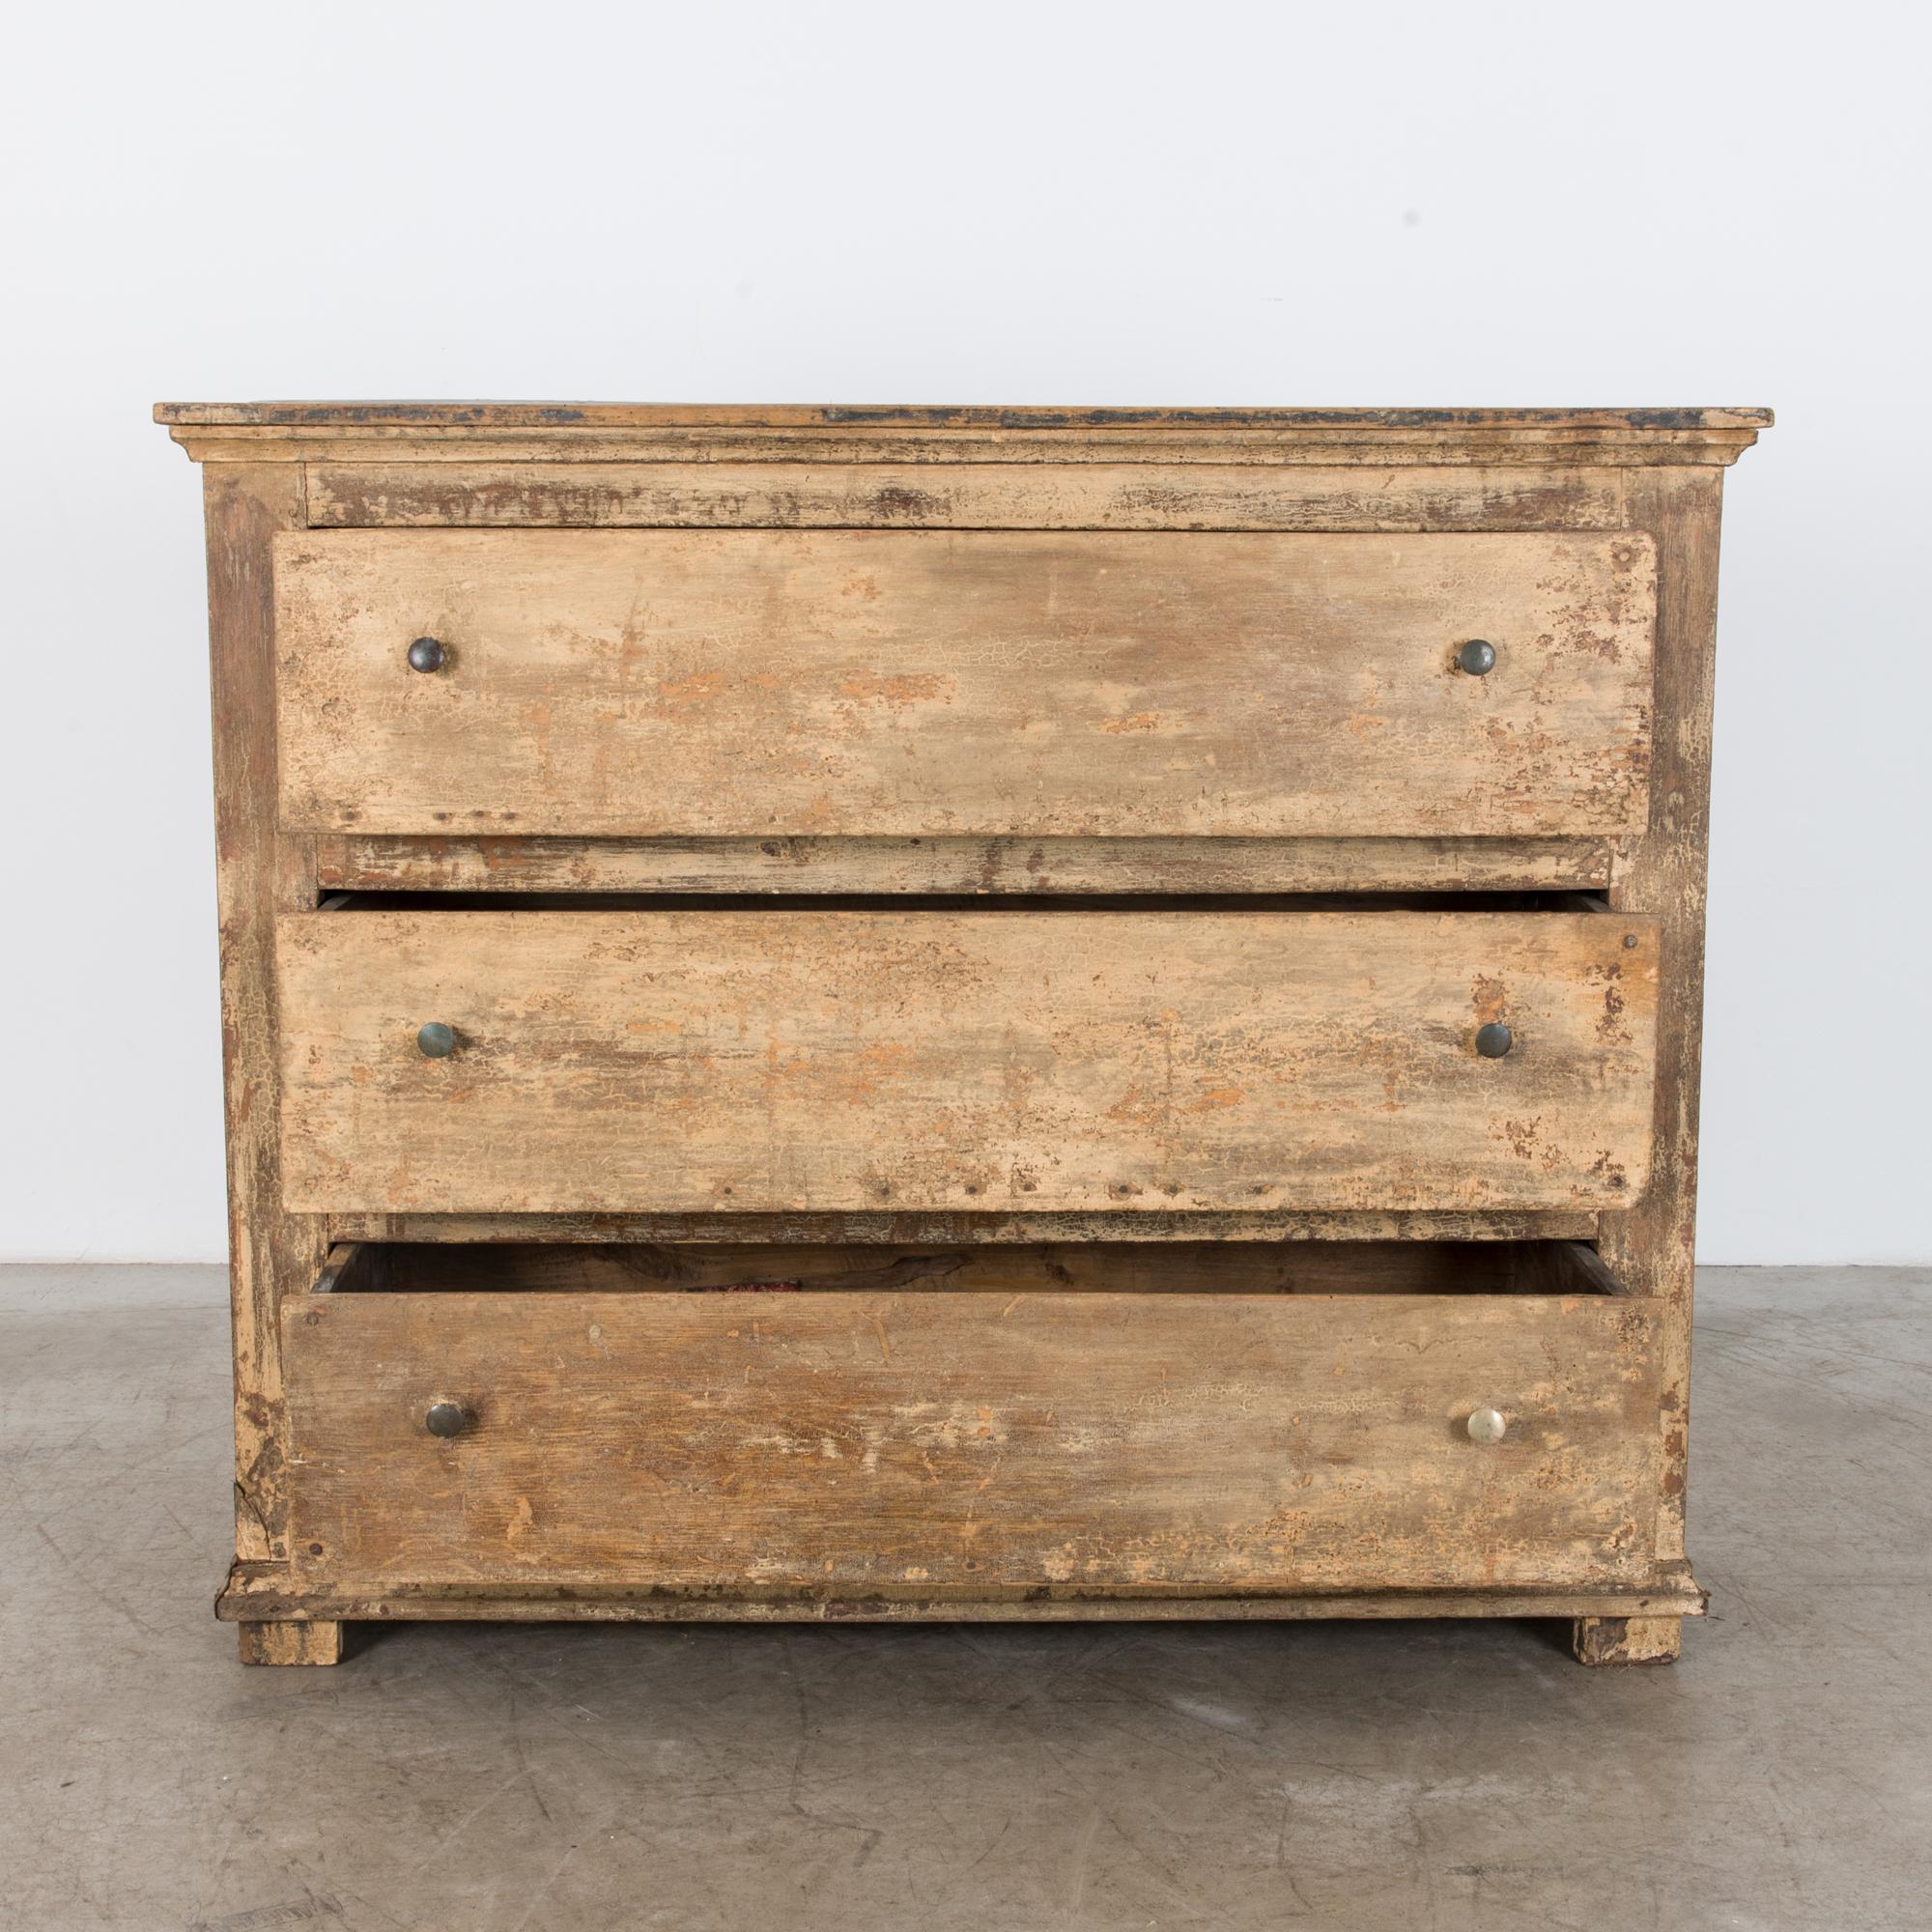 From Belgium, circa 1860. Raised panel three drawer chest with slab fronts, slim 18 1/2